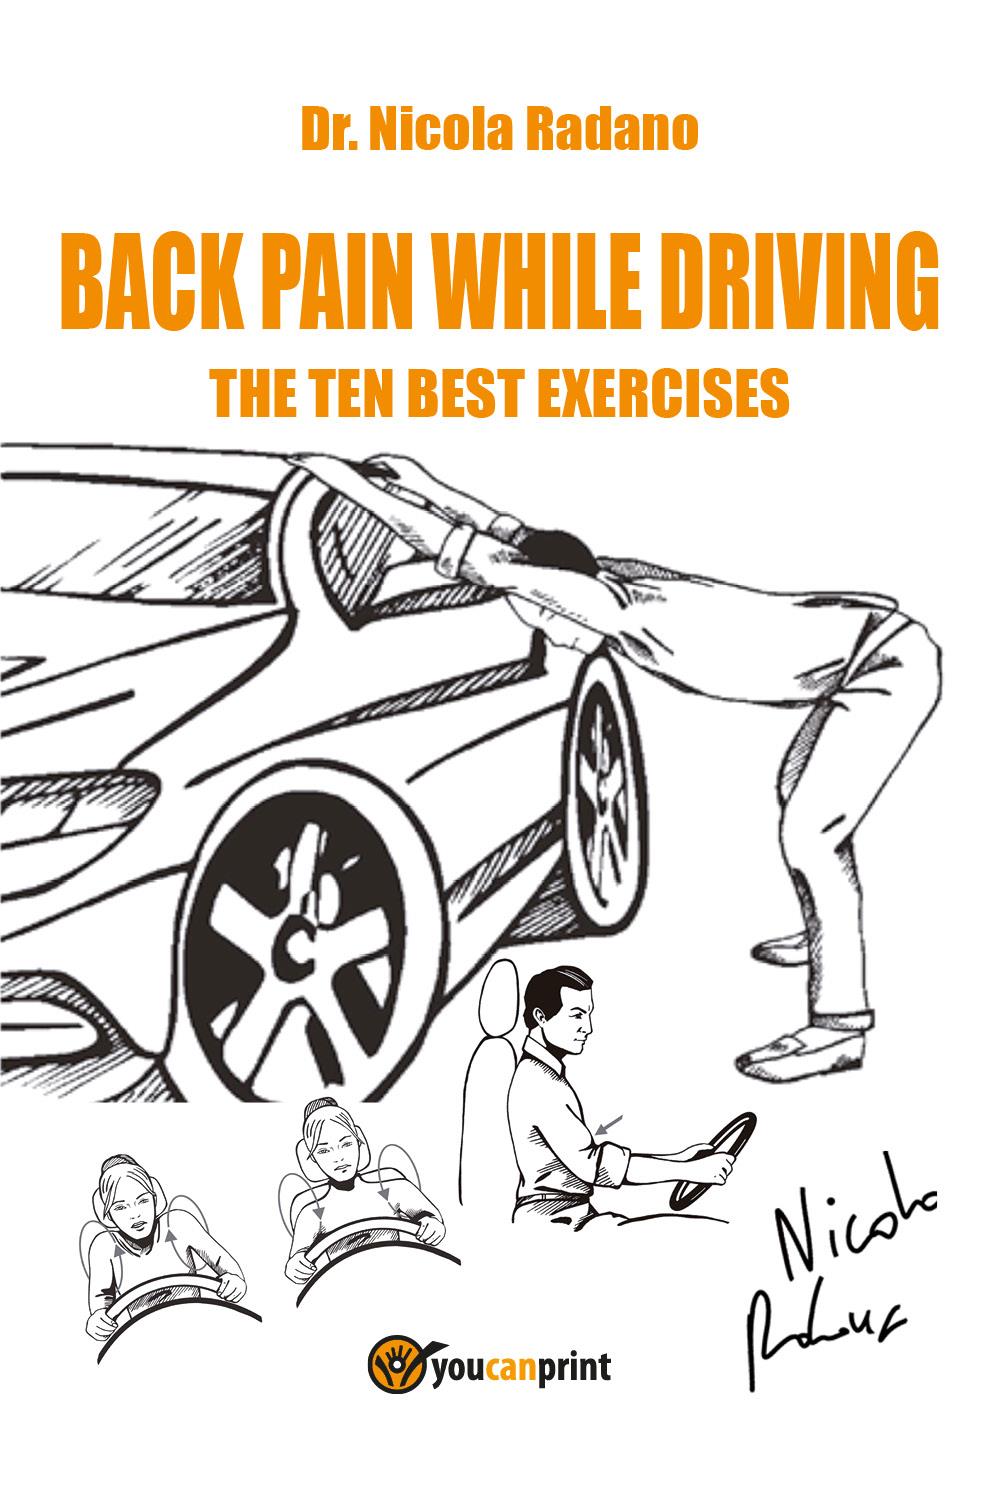 Back pain while driving